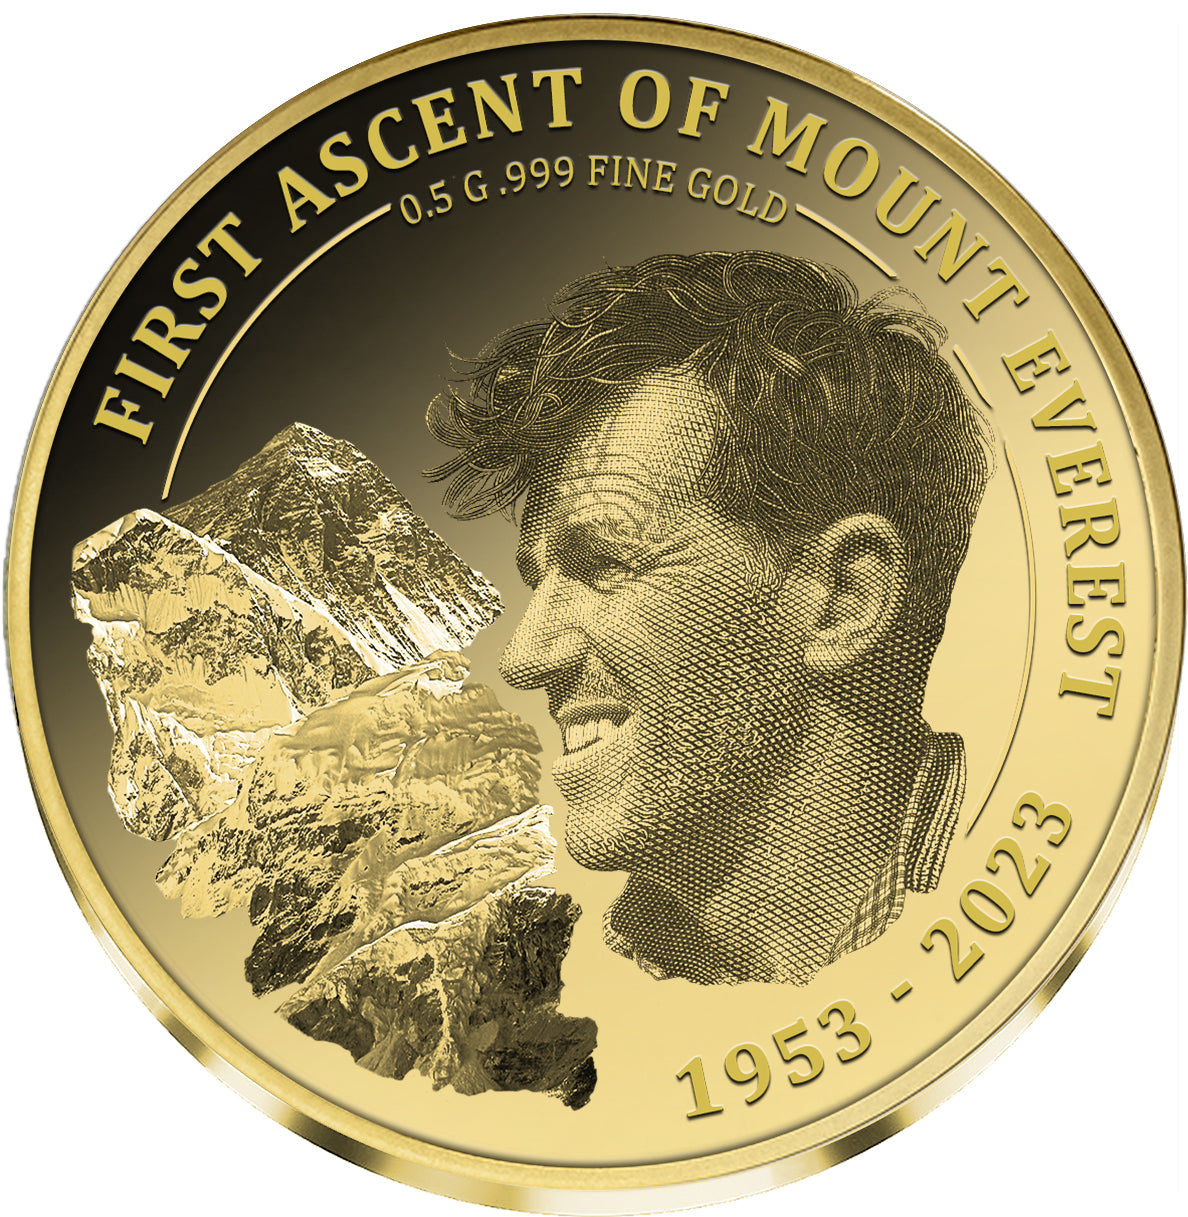 2023 Congo Mt. Everest First Ascent 70th Anniversary - 0.5 g Gold Coin